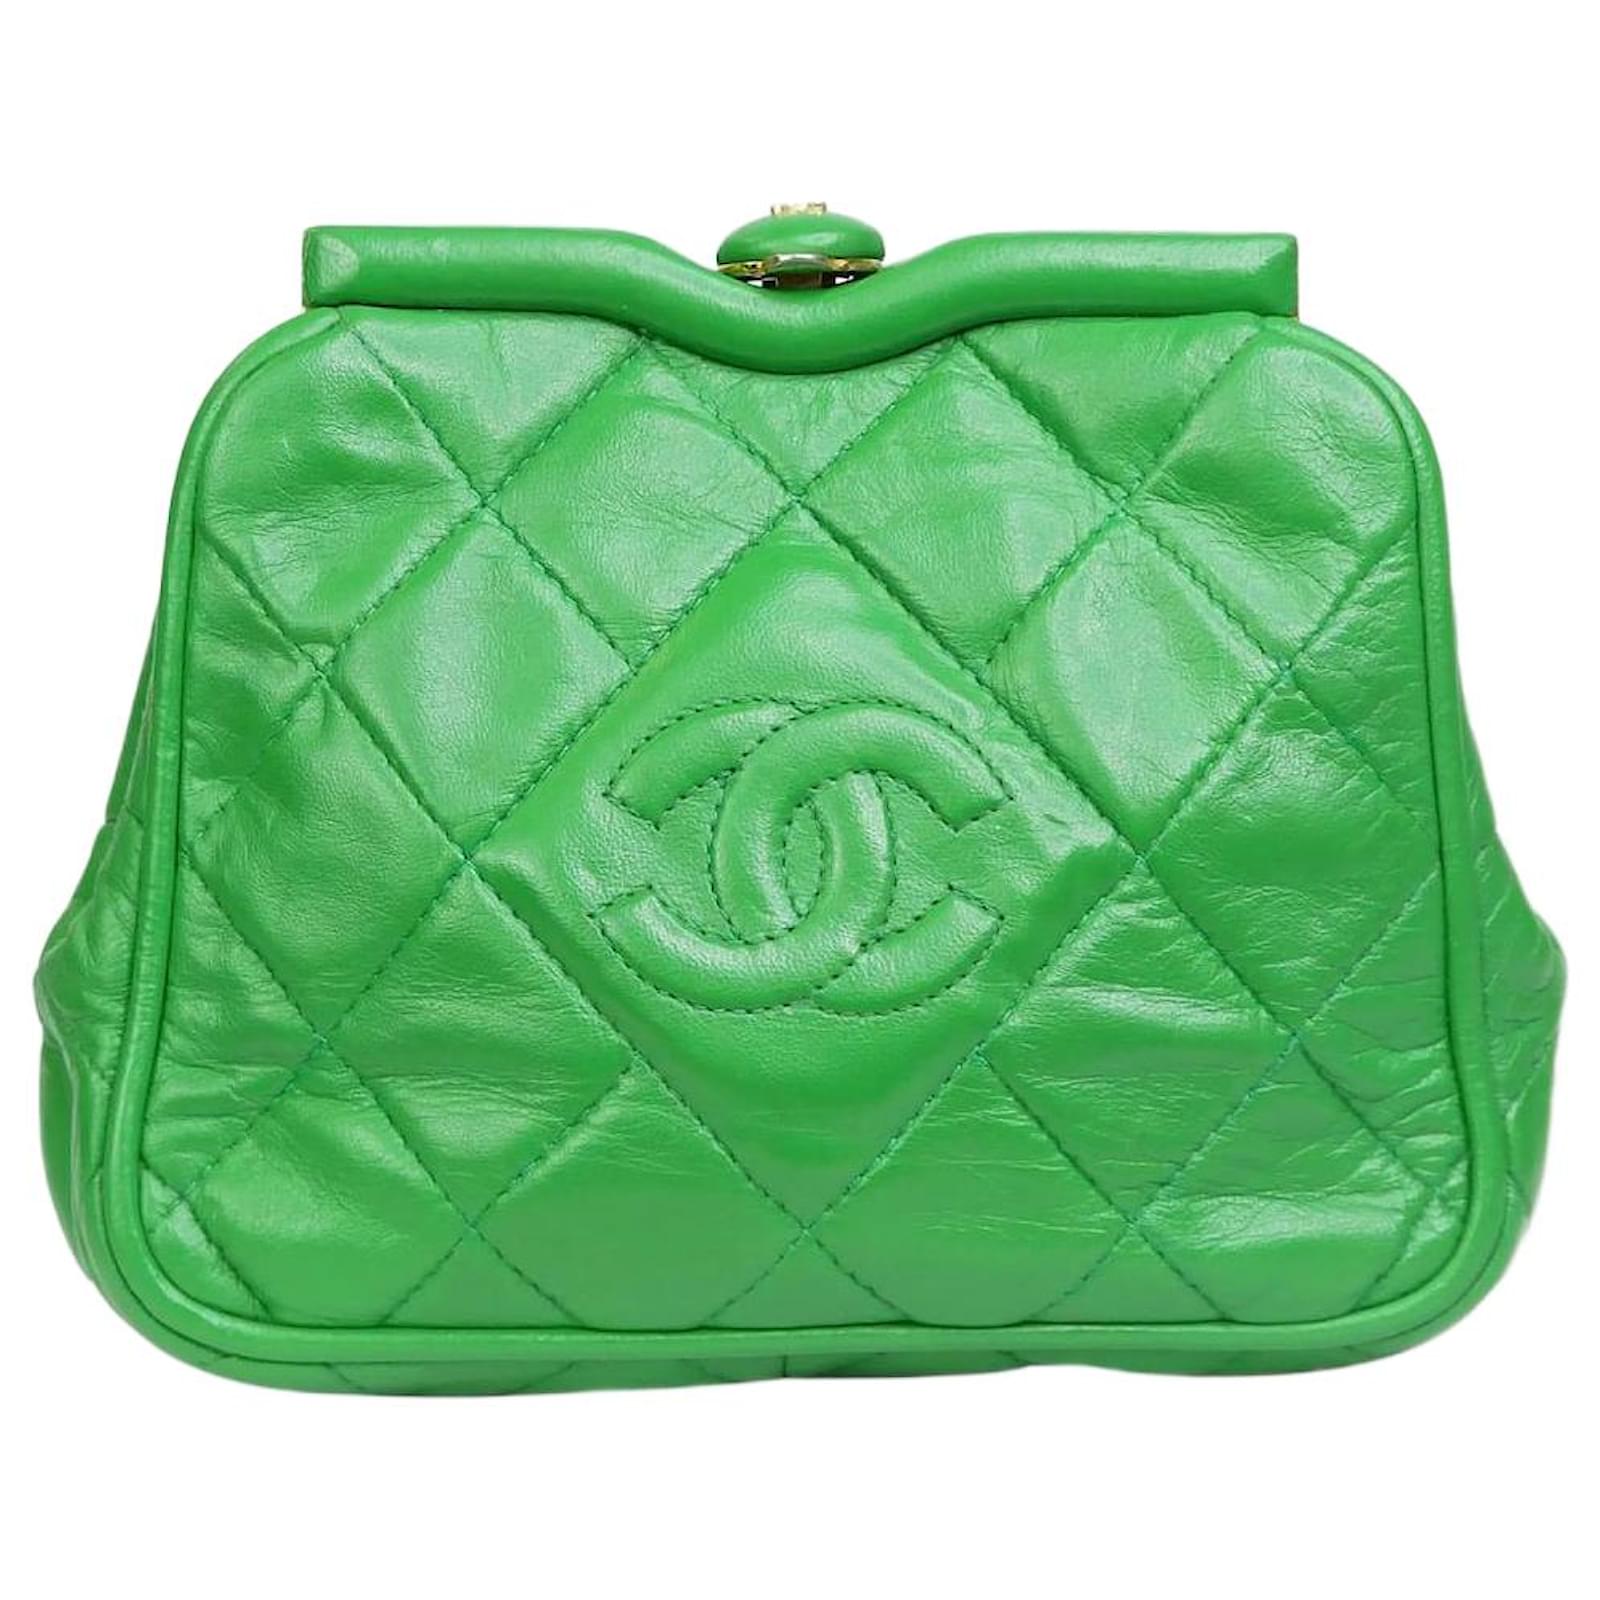 1989 Chanel Bag - 187 For Sale on 1stDibs  1989 chanel square mini bag,  chanel 1989 collection, chanel 89